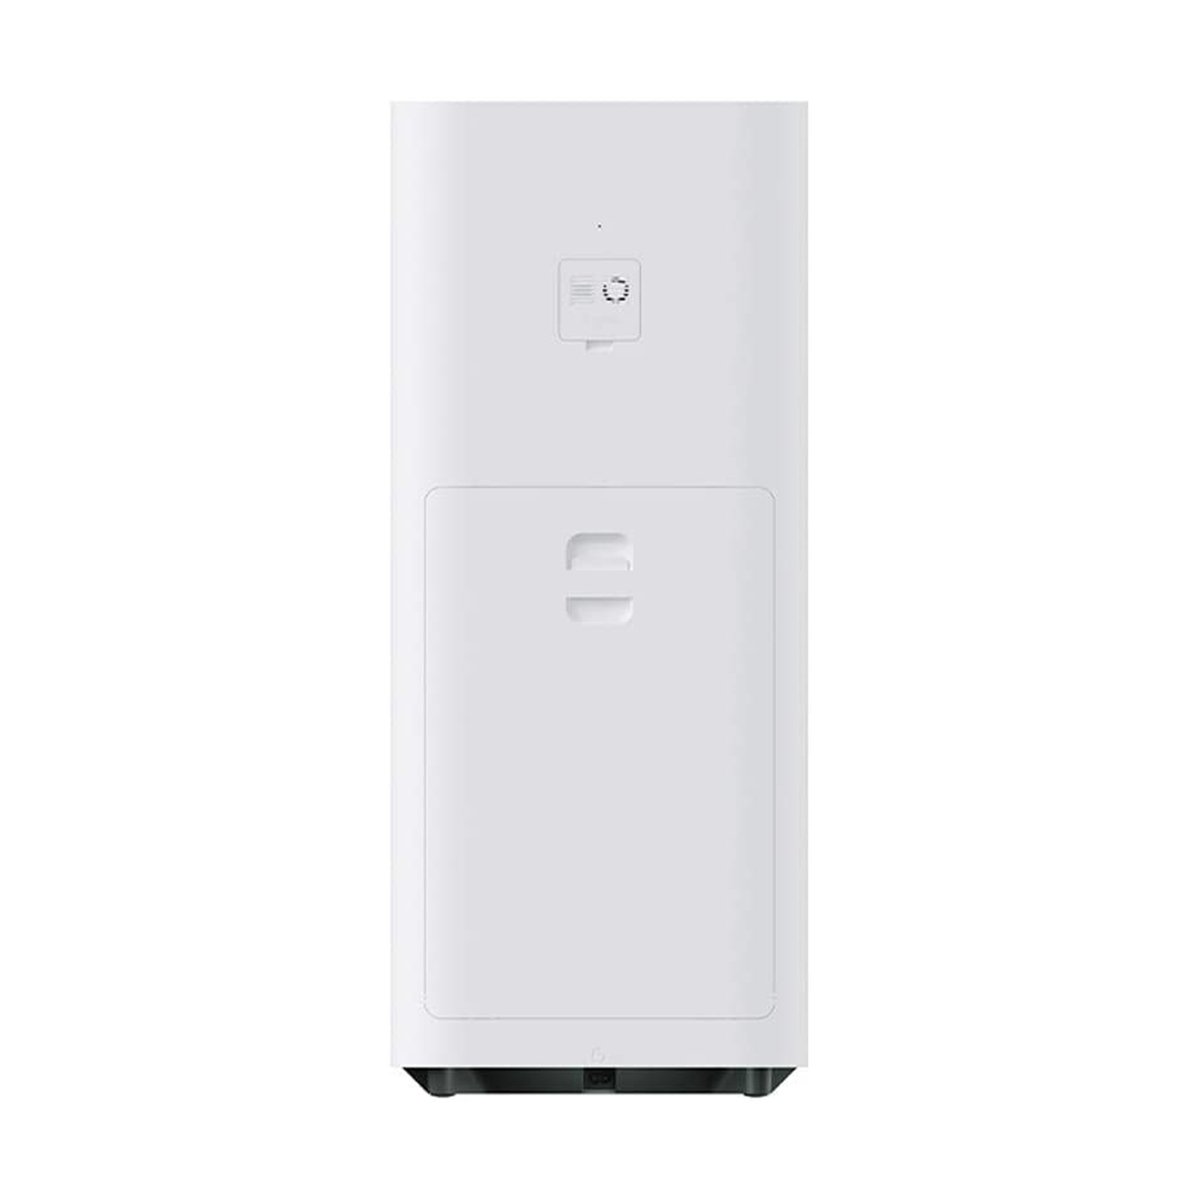 Mi Air Purifier Pro H OLED Touch Display,600m3/h Particle CADR,Effective Area: 200 m² Lifespan HEPA filter  BHR4280GL